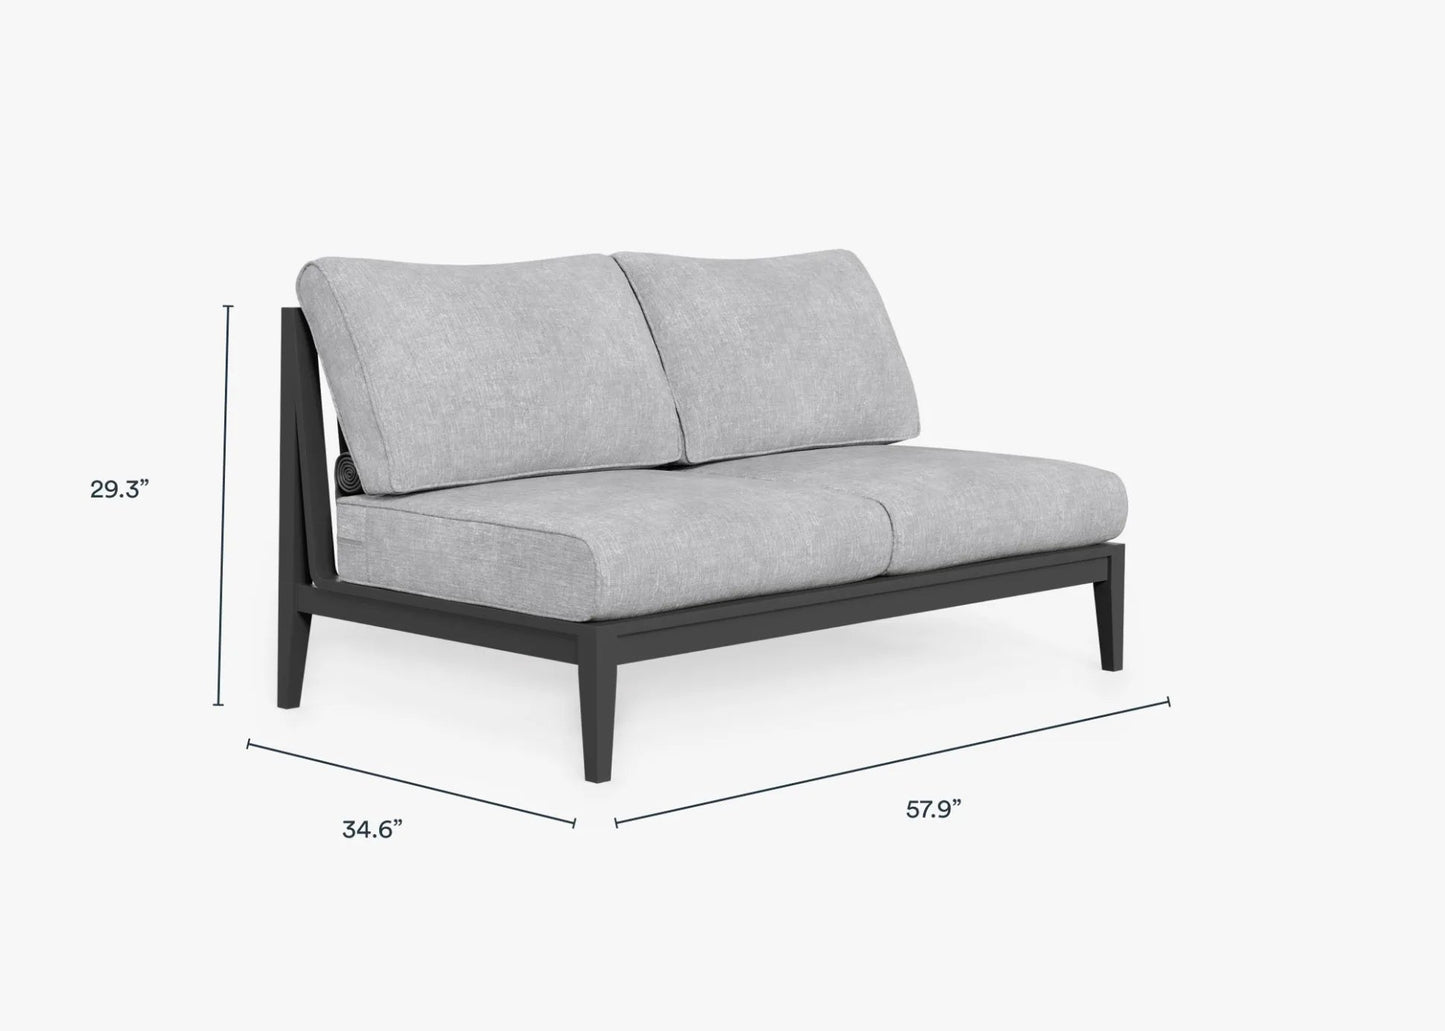 Live Outer 58" Charcoal Aluminum Outdoor Armless Loveseat With Pacific Fog Gray Cushion